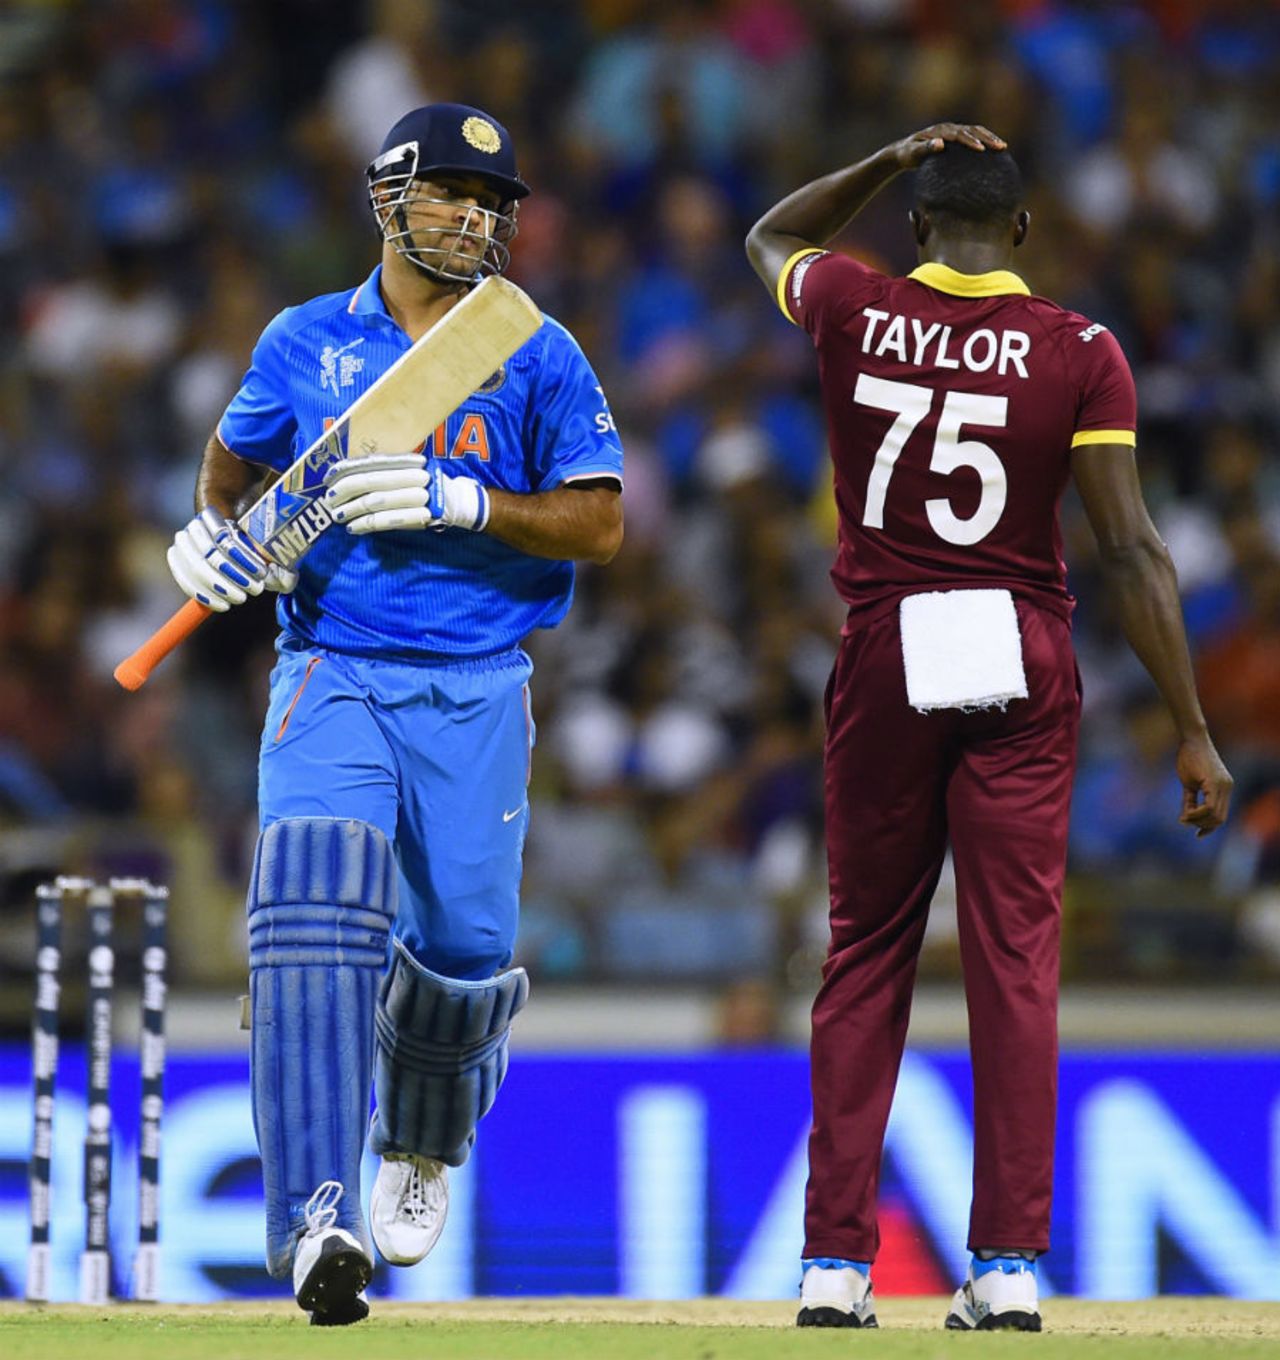 MS Dhoni struck an unbeaten 56-ball 45 to guide India home, India v West Indies, World Cup 2015, Group B, Perth, March 6